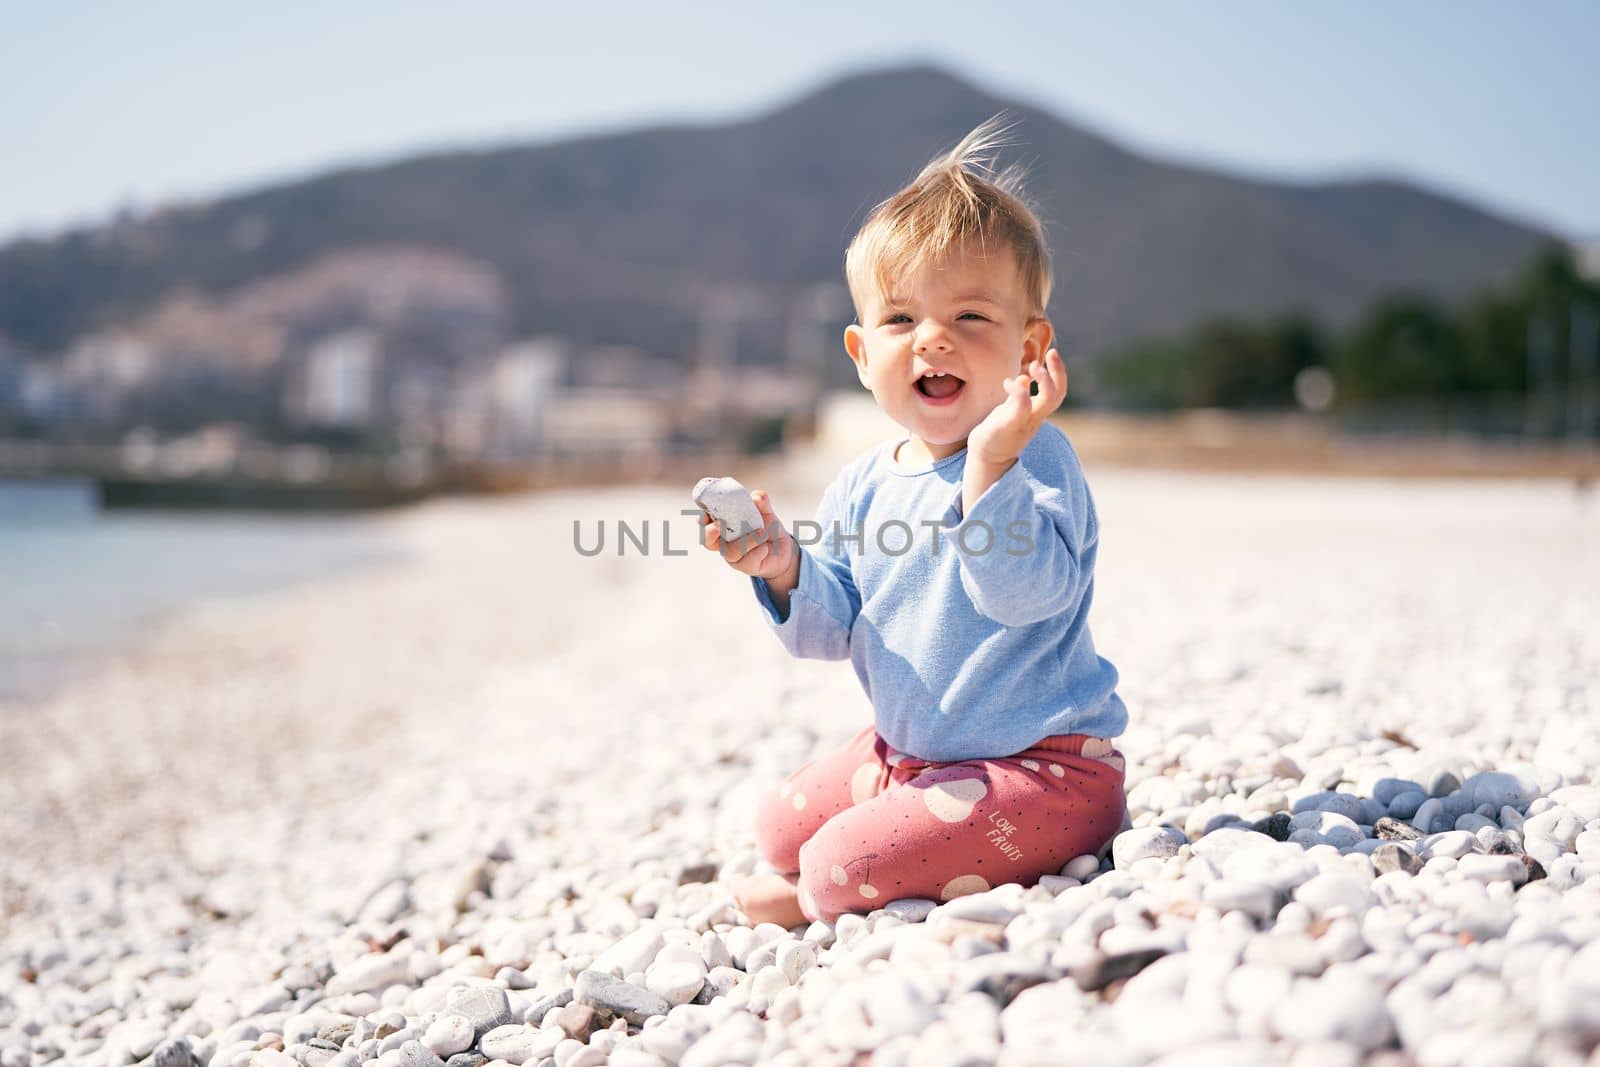 Laughing kid sits with a pebble in one hand and a raised second hand on a pebble beach against a background of mountains. High quality photo